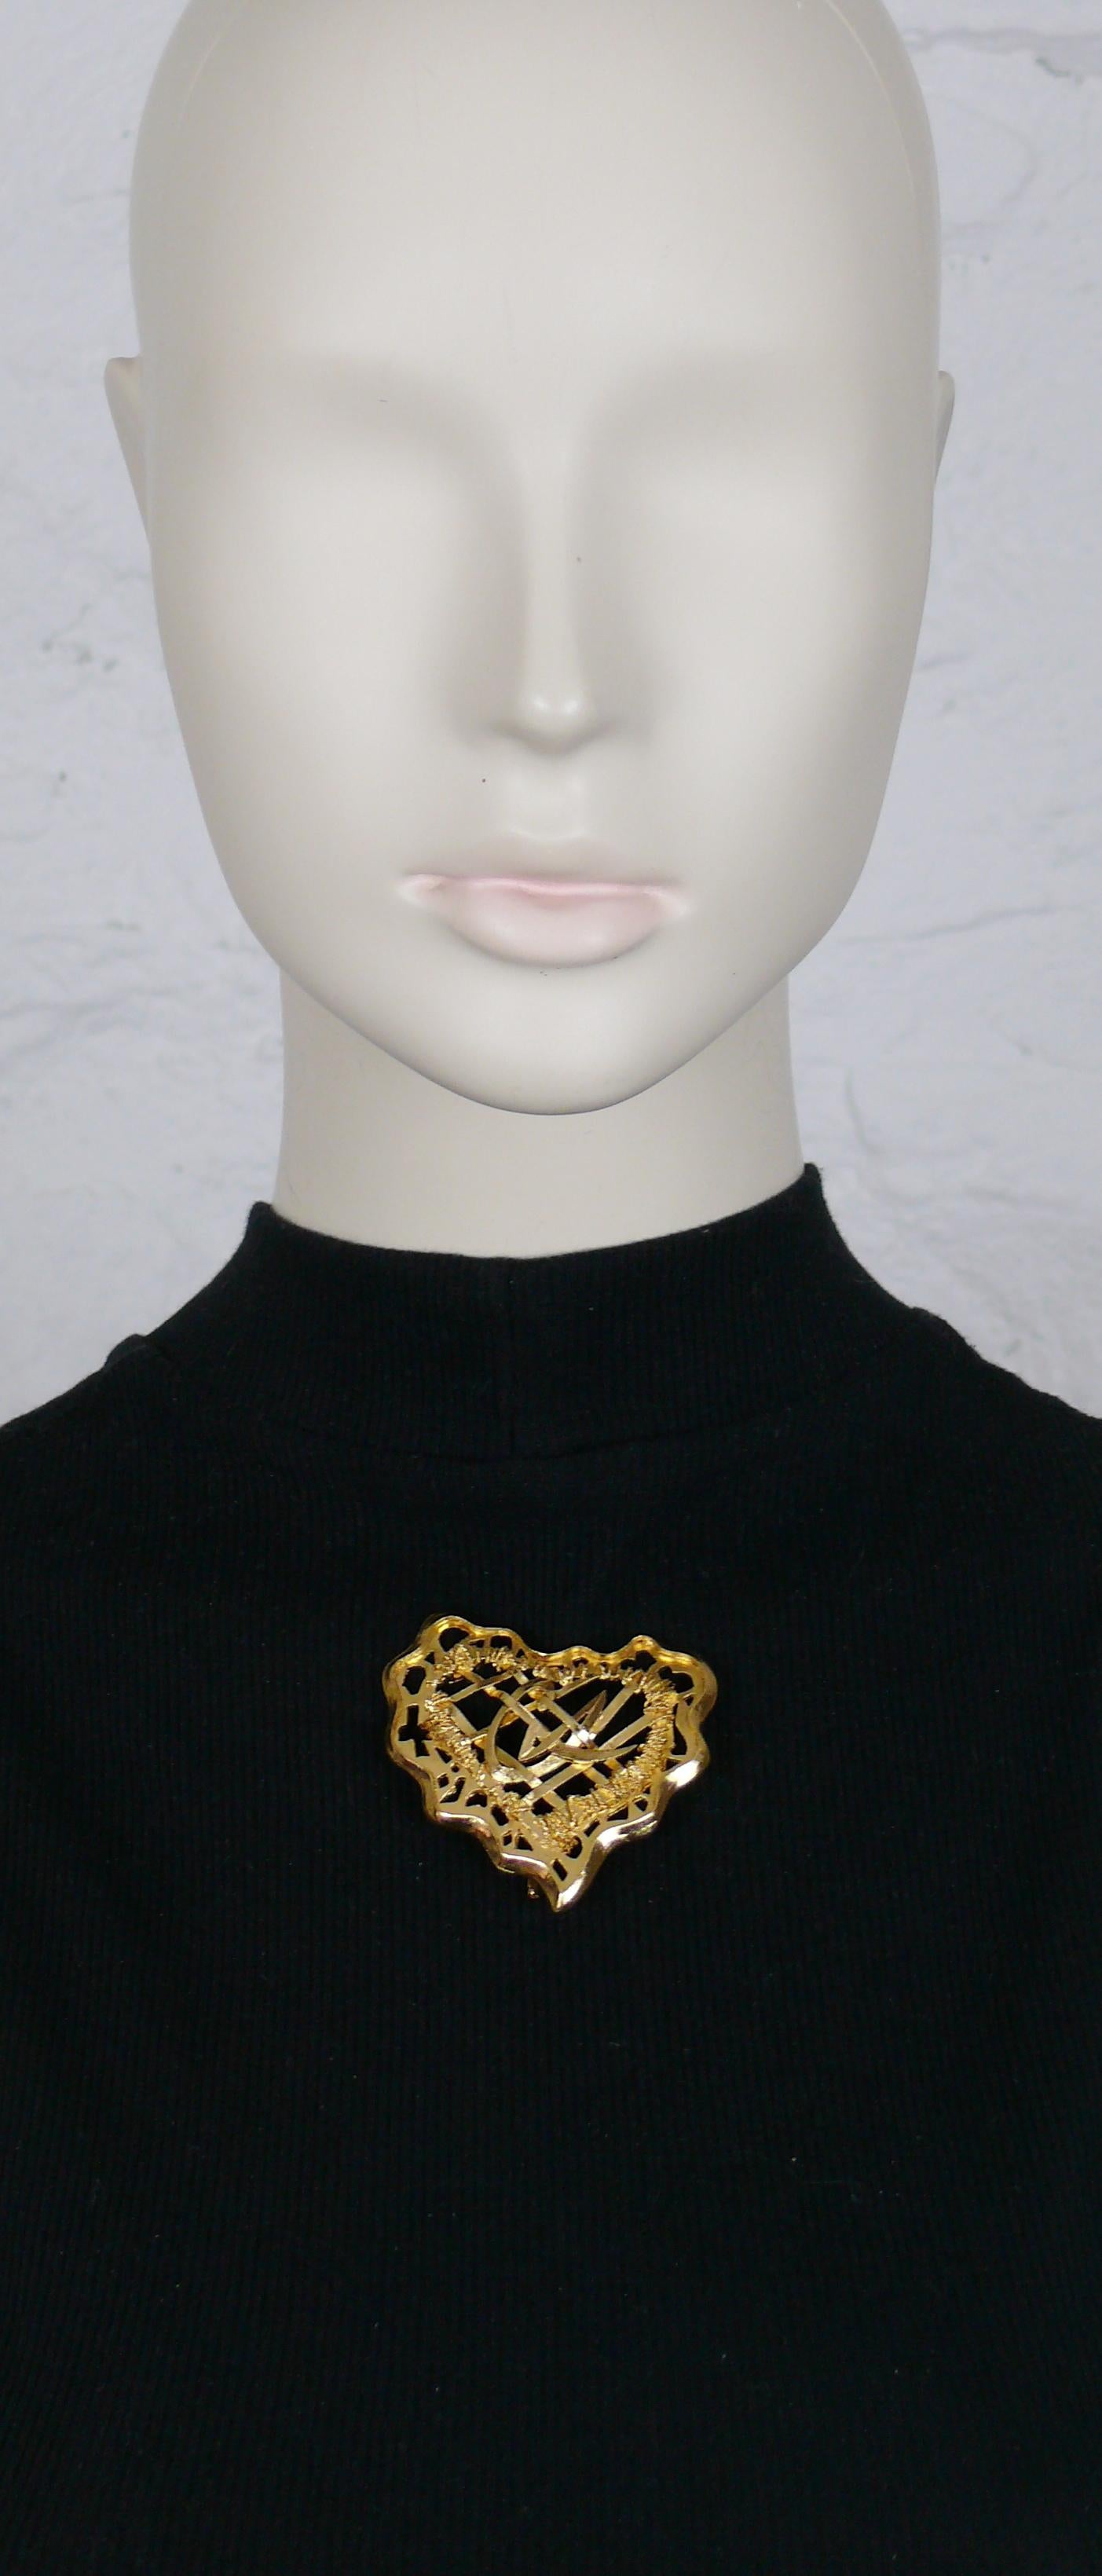 CHRISTIAN LACROIX vintage gold toned openwork grid design with CL logo heart brooch.

Marked CHRISTIAN LACROIX CL Made in France.

Indicative measurements : max. height approx. 5.4 cm (2.13 inches) / max. height approx. 5.6 cm (2.20